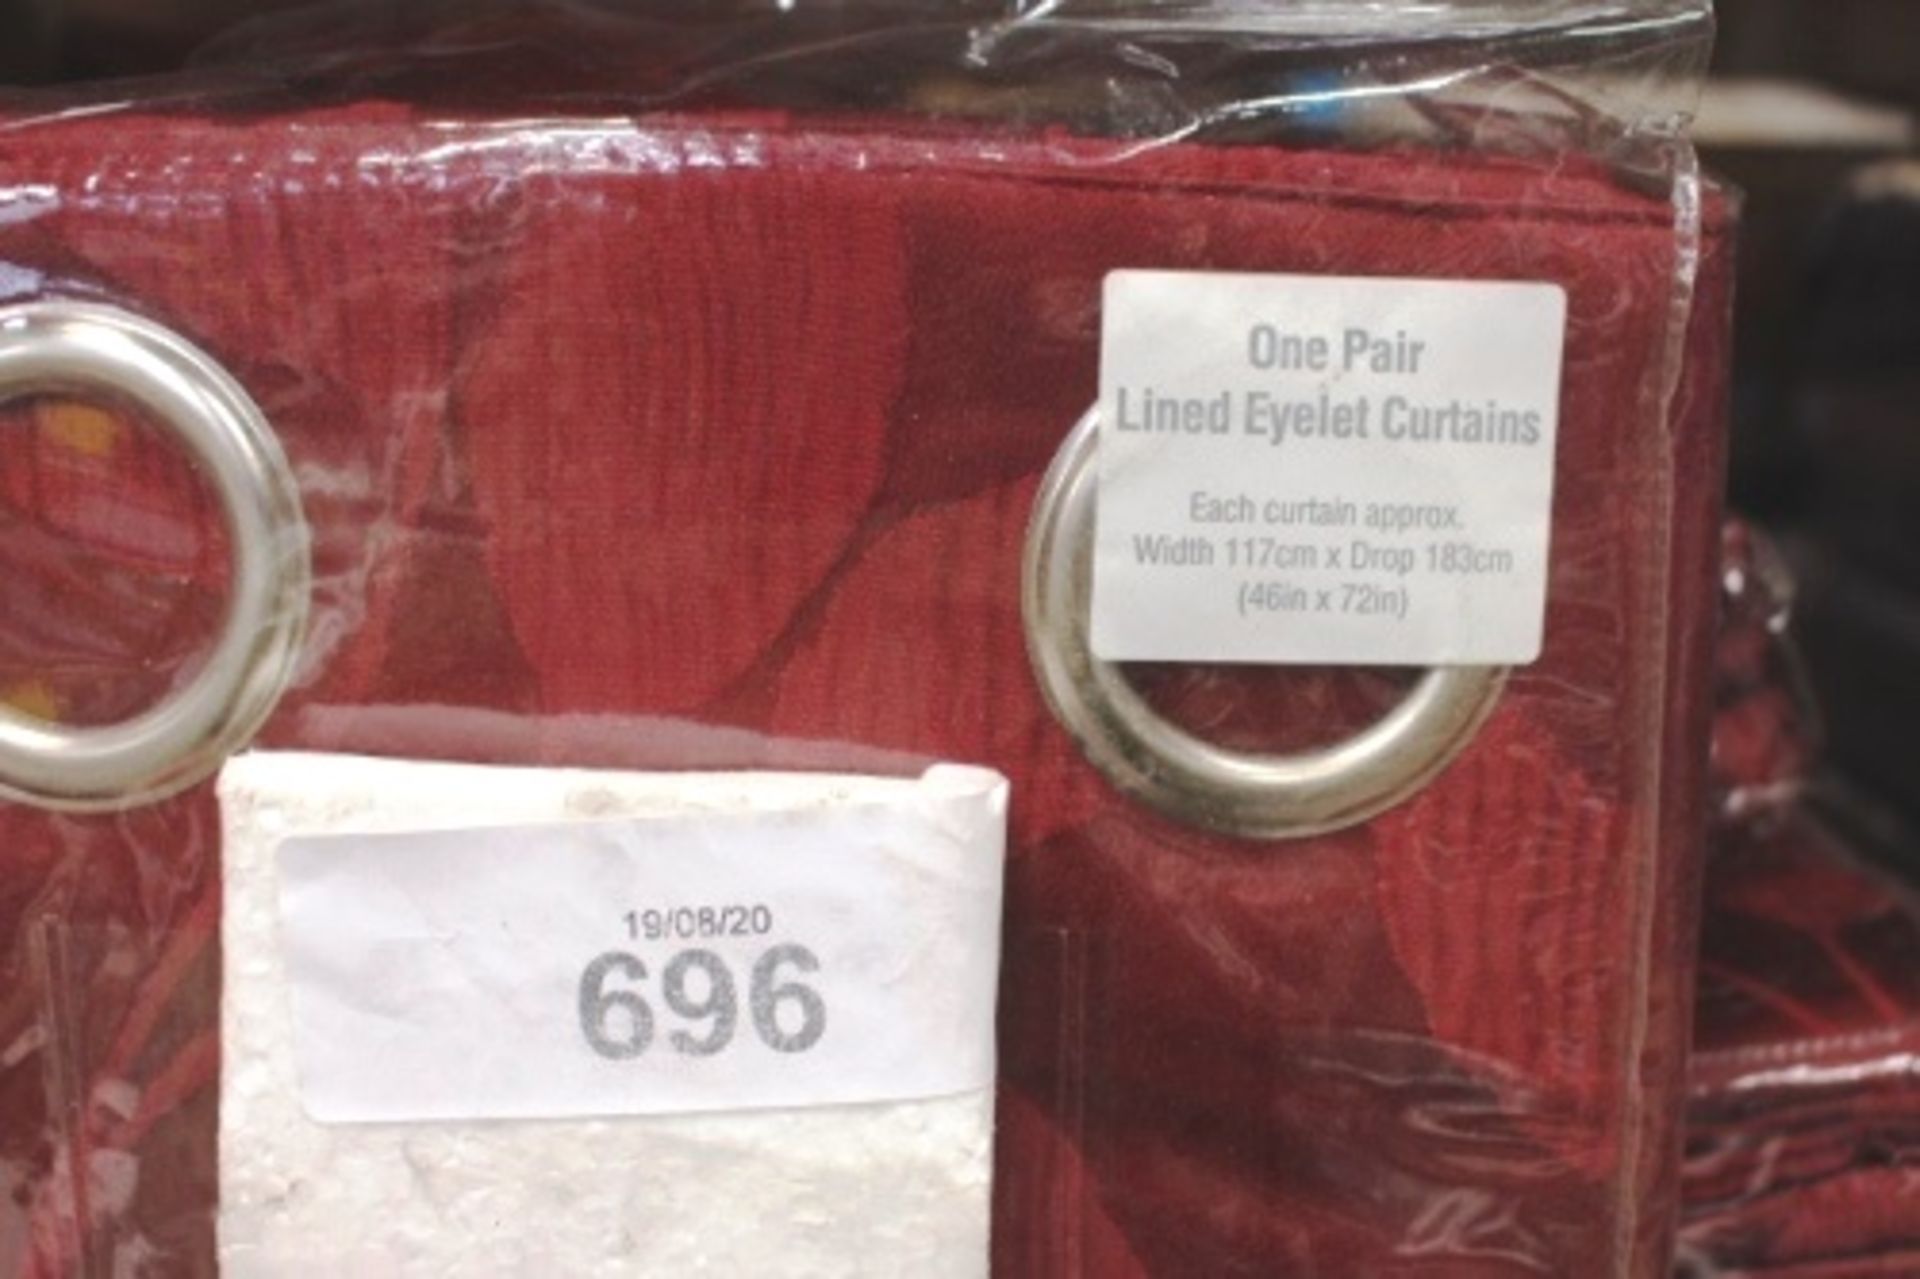 21 x assorted sized pairs of red classic leaf lined eyelet curtains - New in pack, some packs - Image 3 of 3